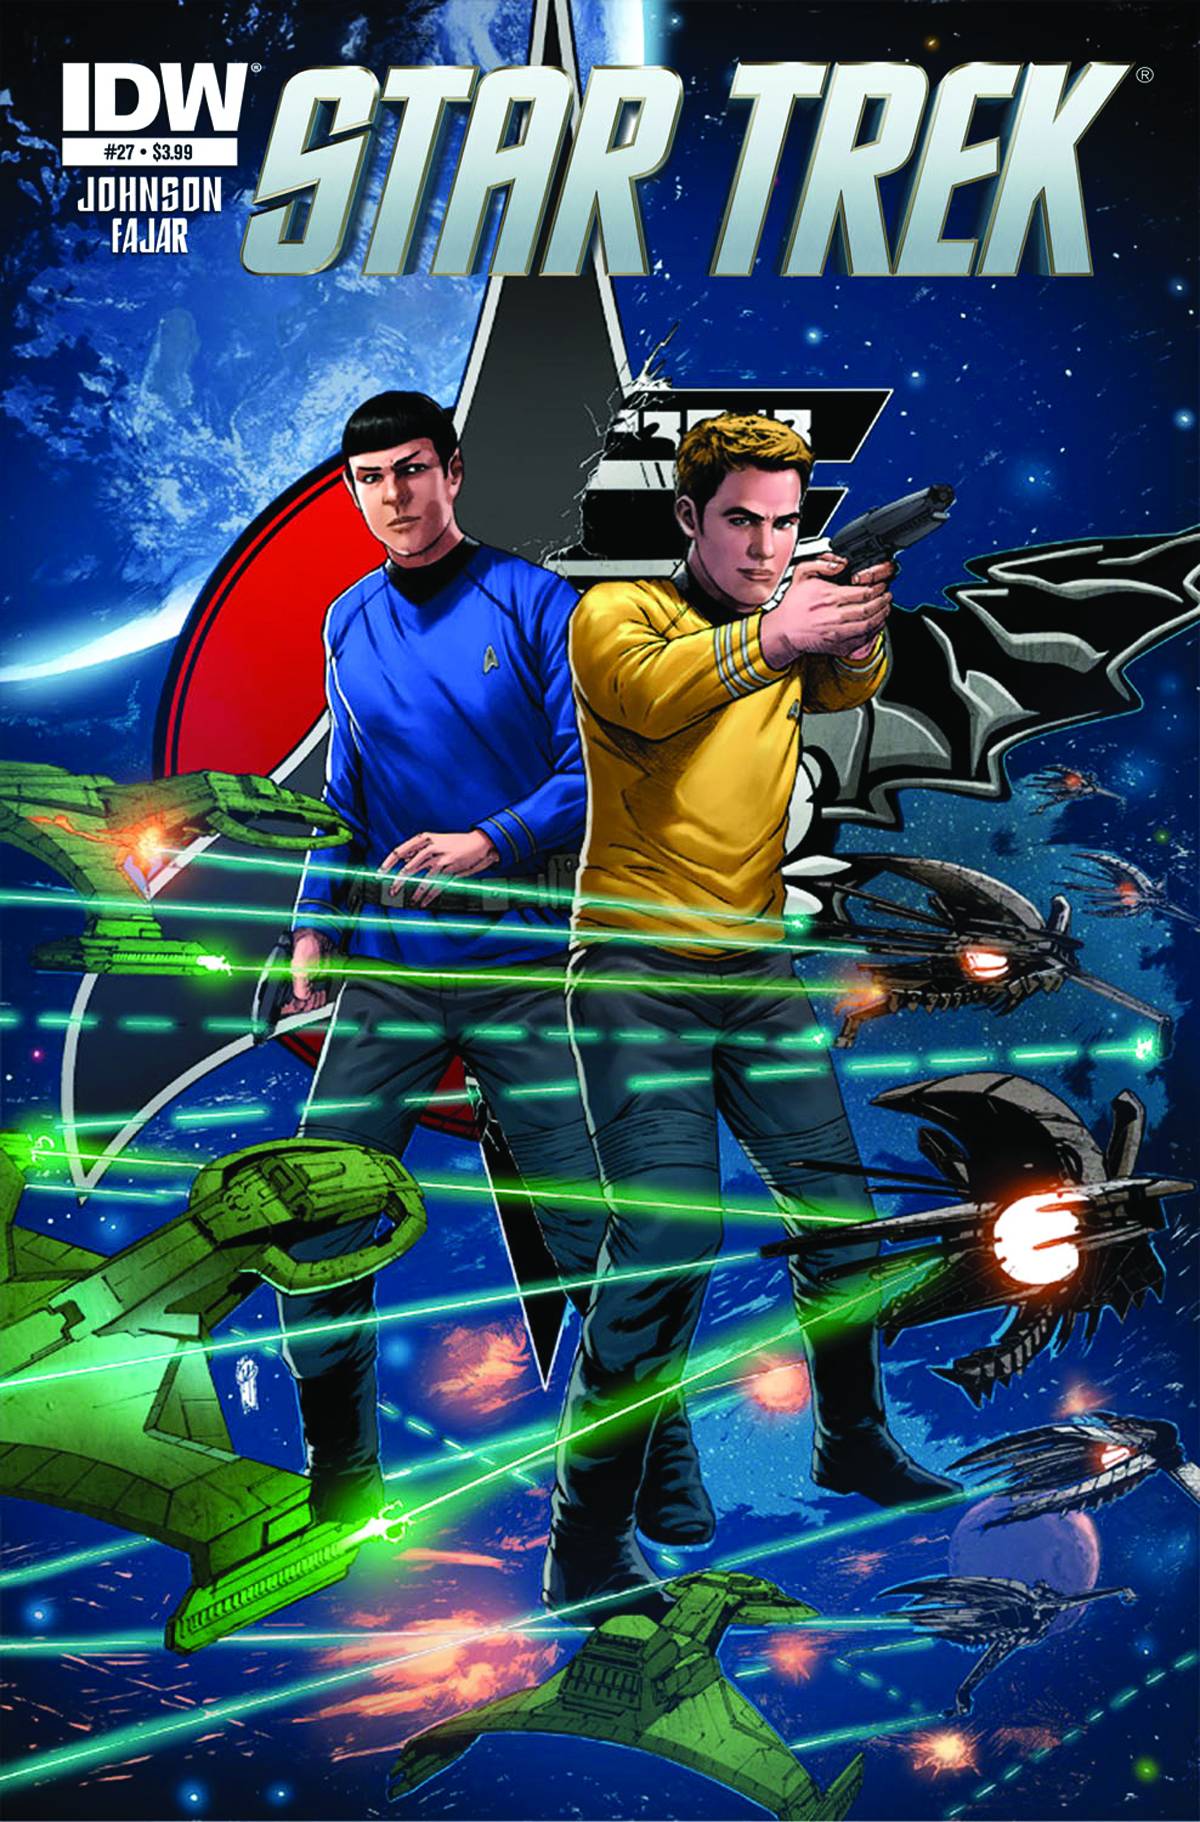 Star Trek Ongoing #27 1:1 for 25 Incentive